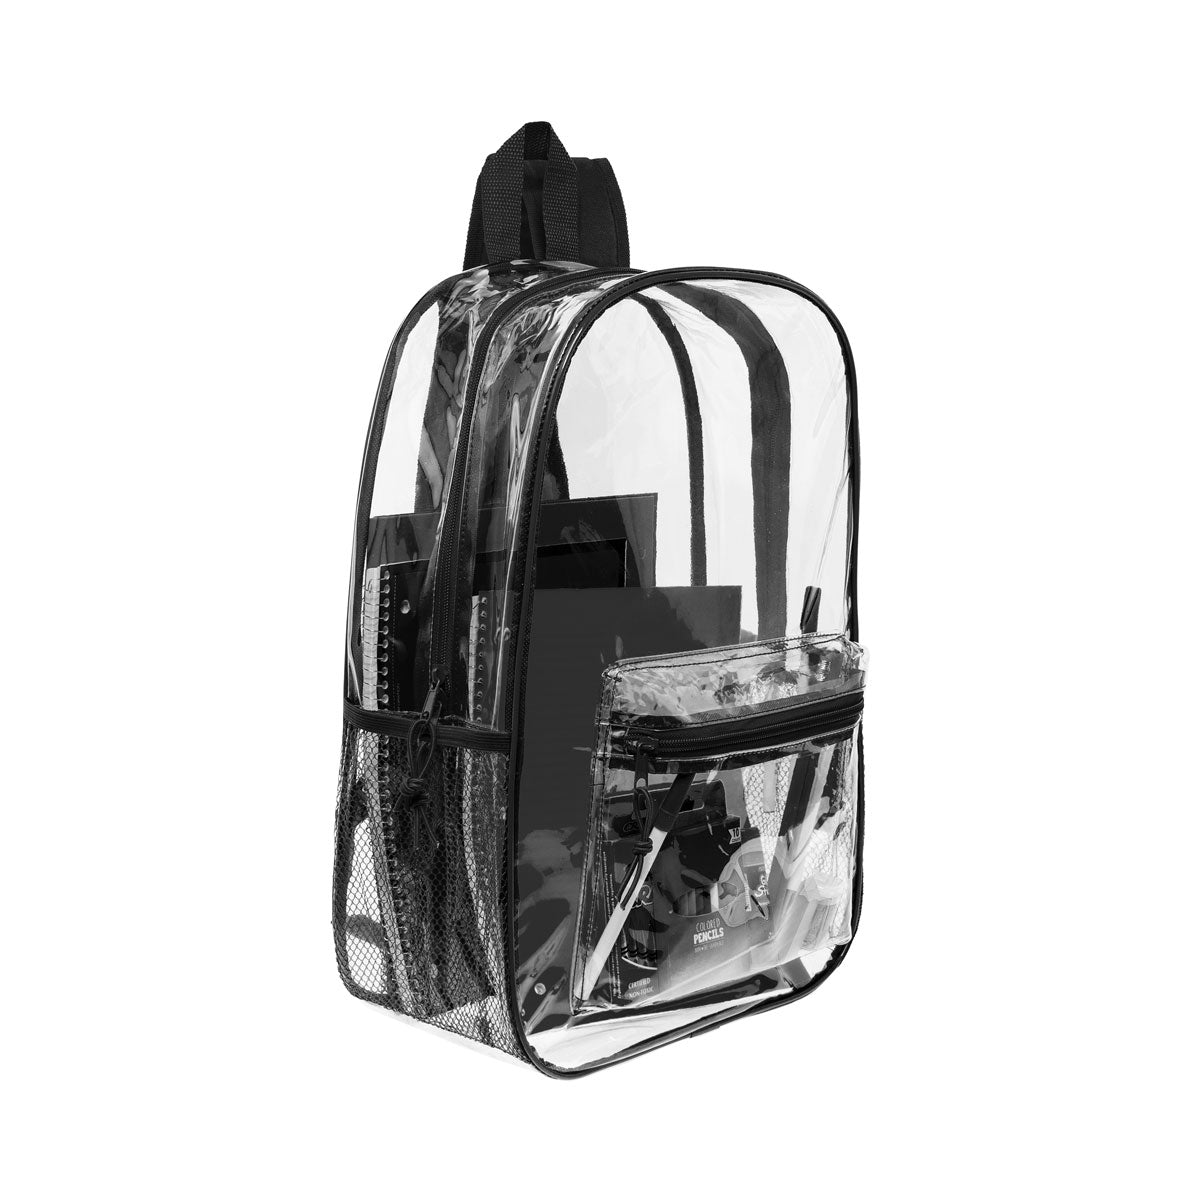 17 Inch Bulk Clear Backpacks in Black with School Supply Kits Wholesale - Case of 12